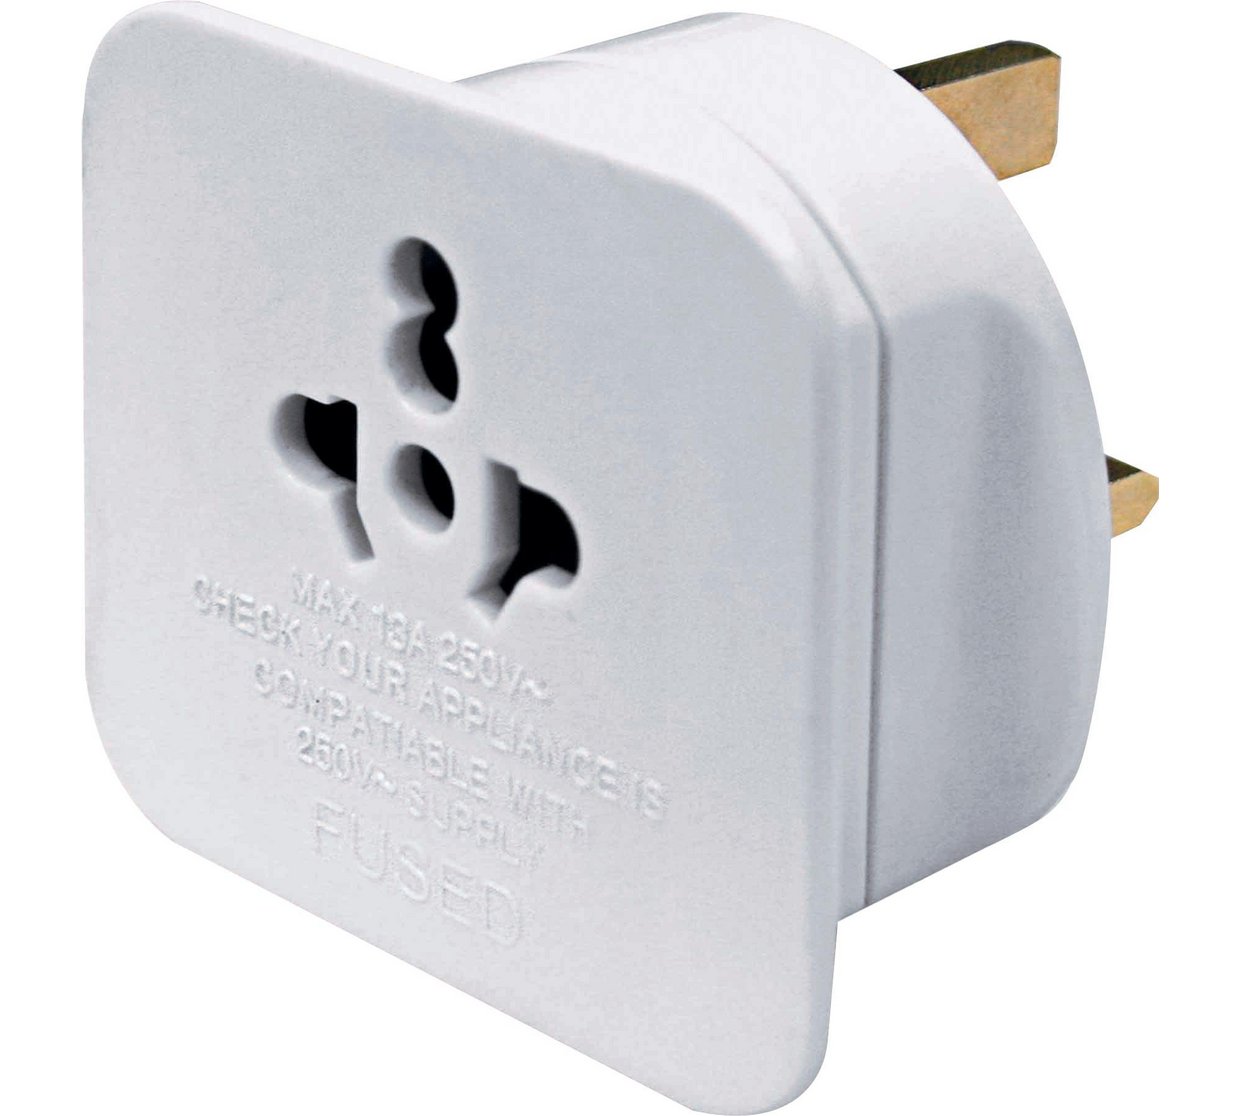 travel adapter needed in iceland